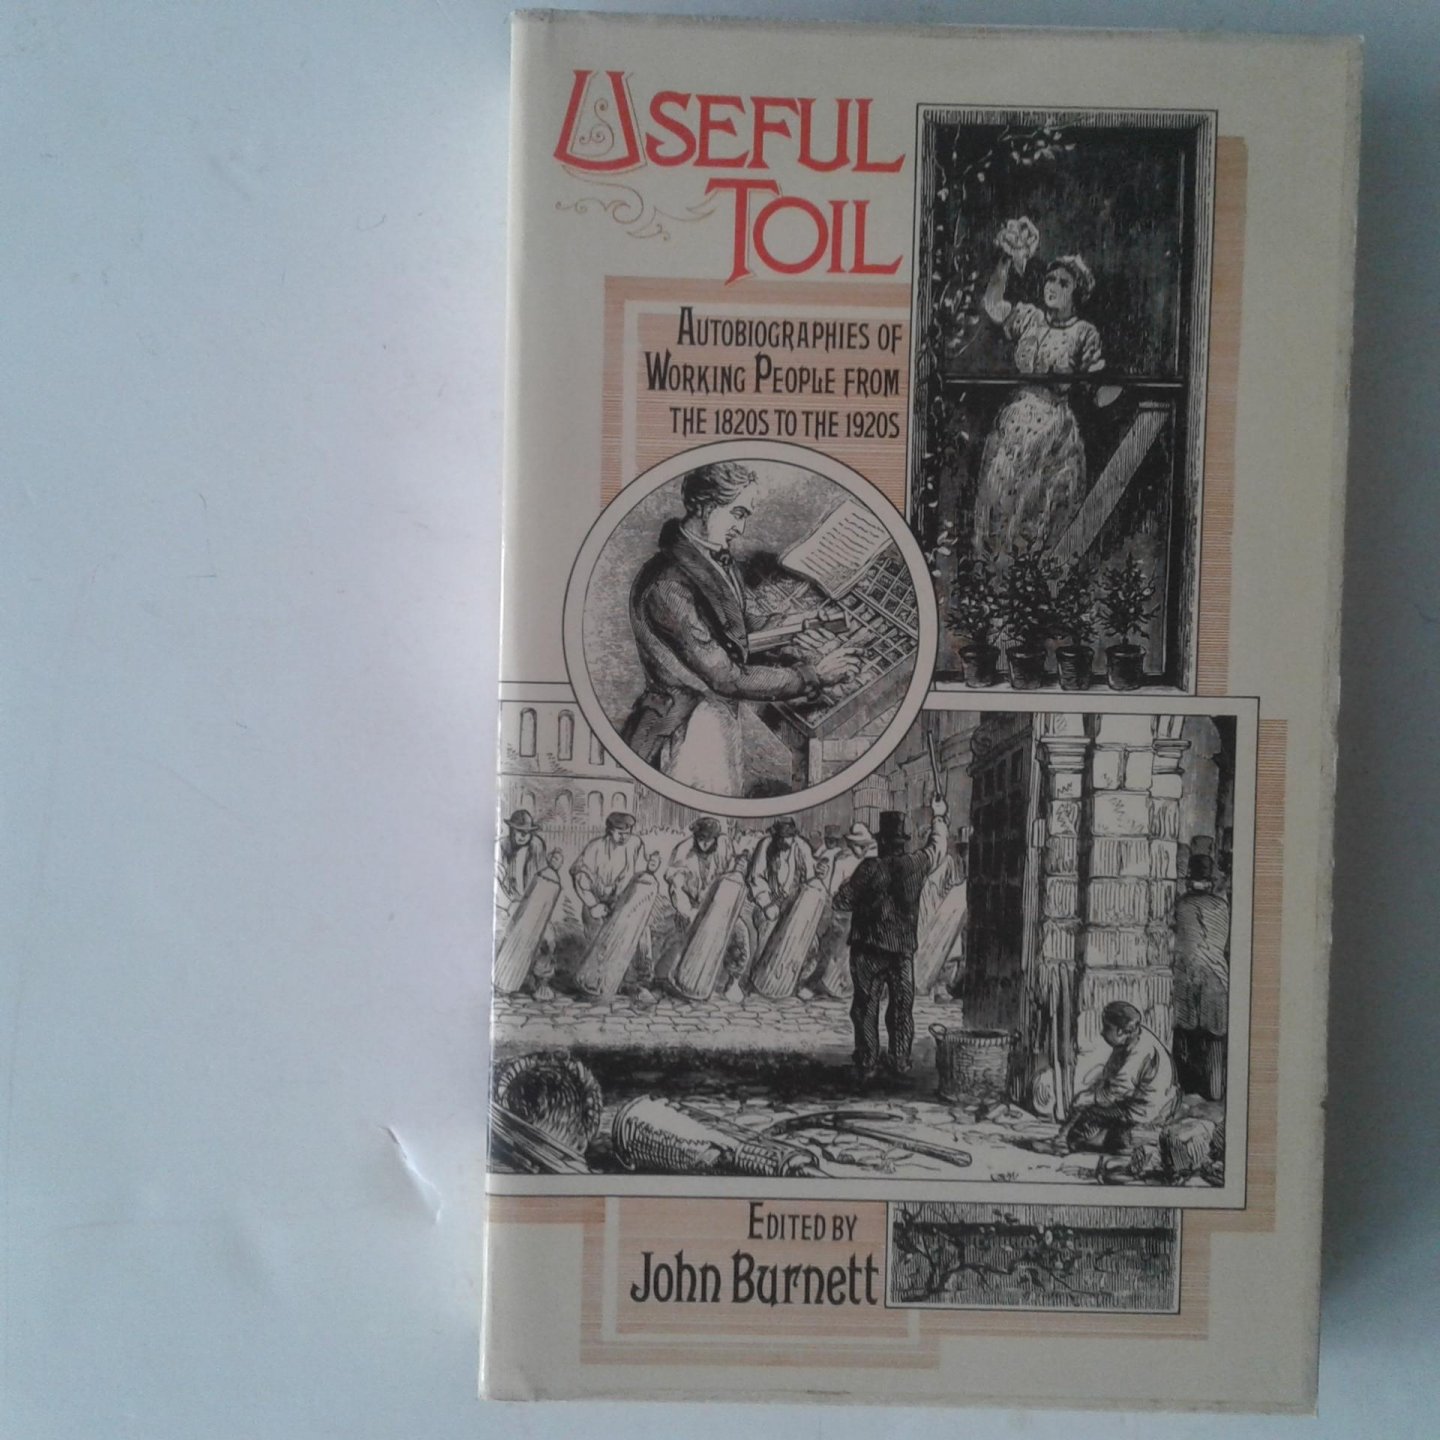 Burnett, John - Useful Toil ; Autobiographies of Working Poeple from the 1820s to the 1920s